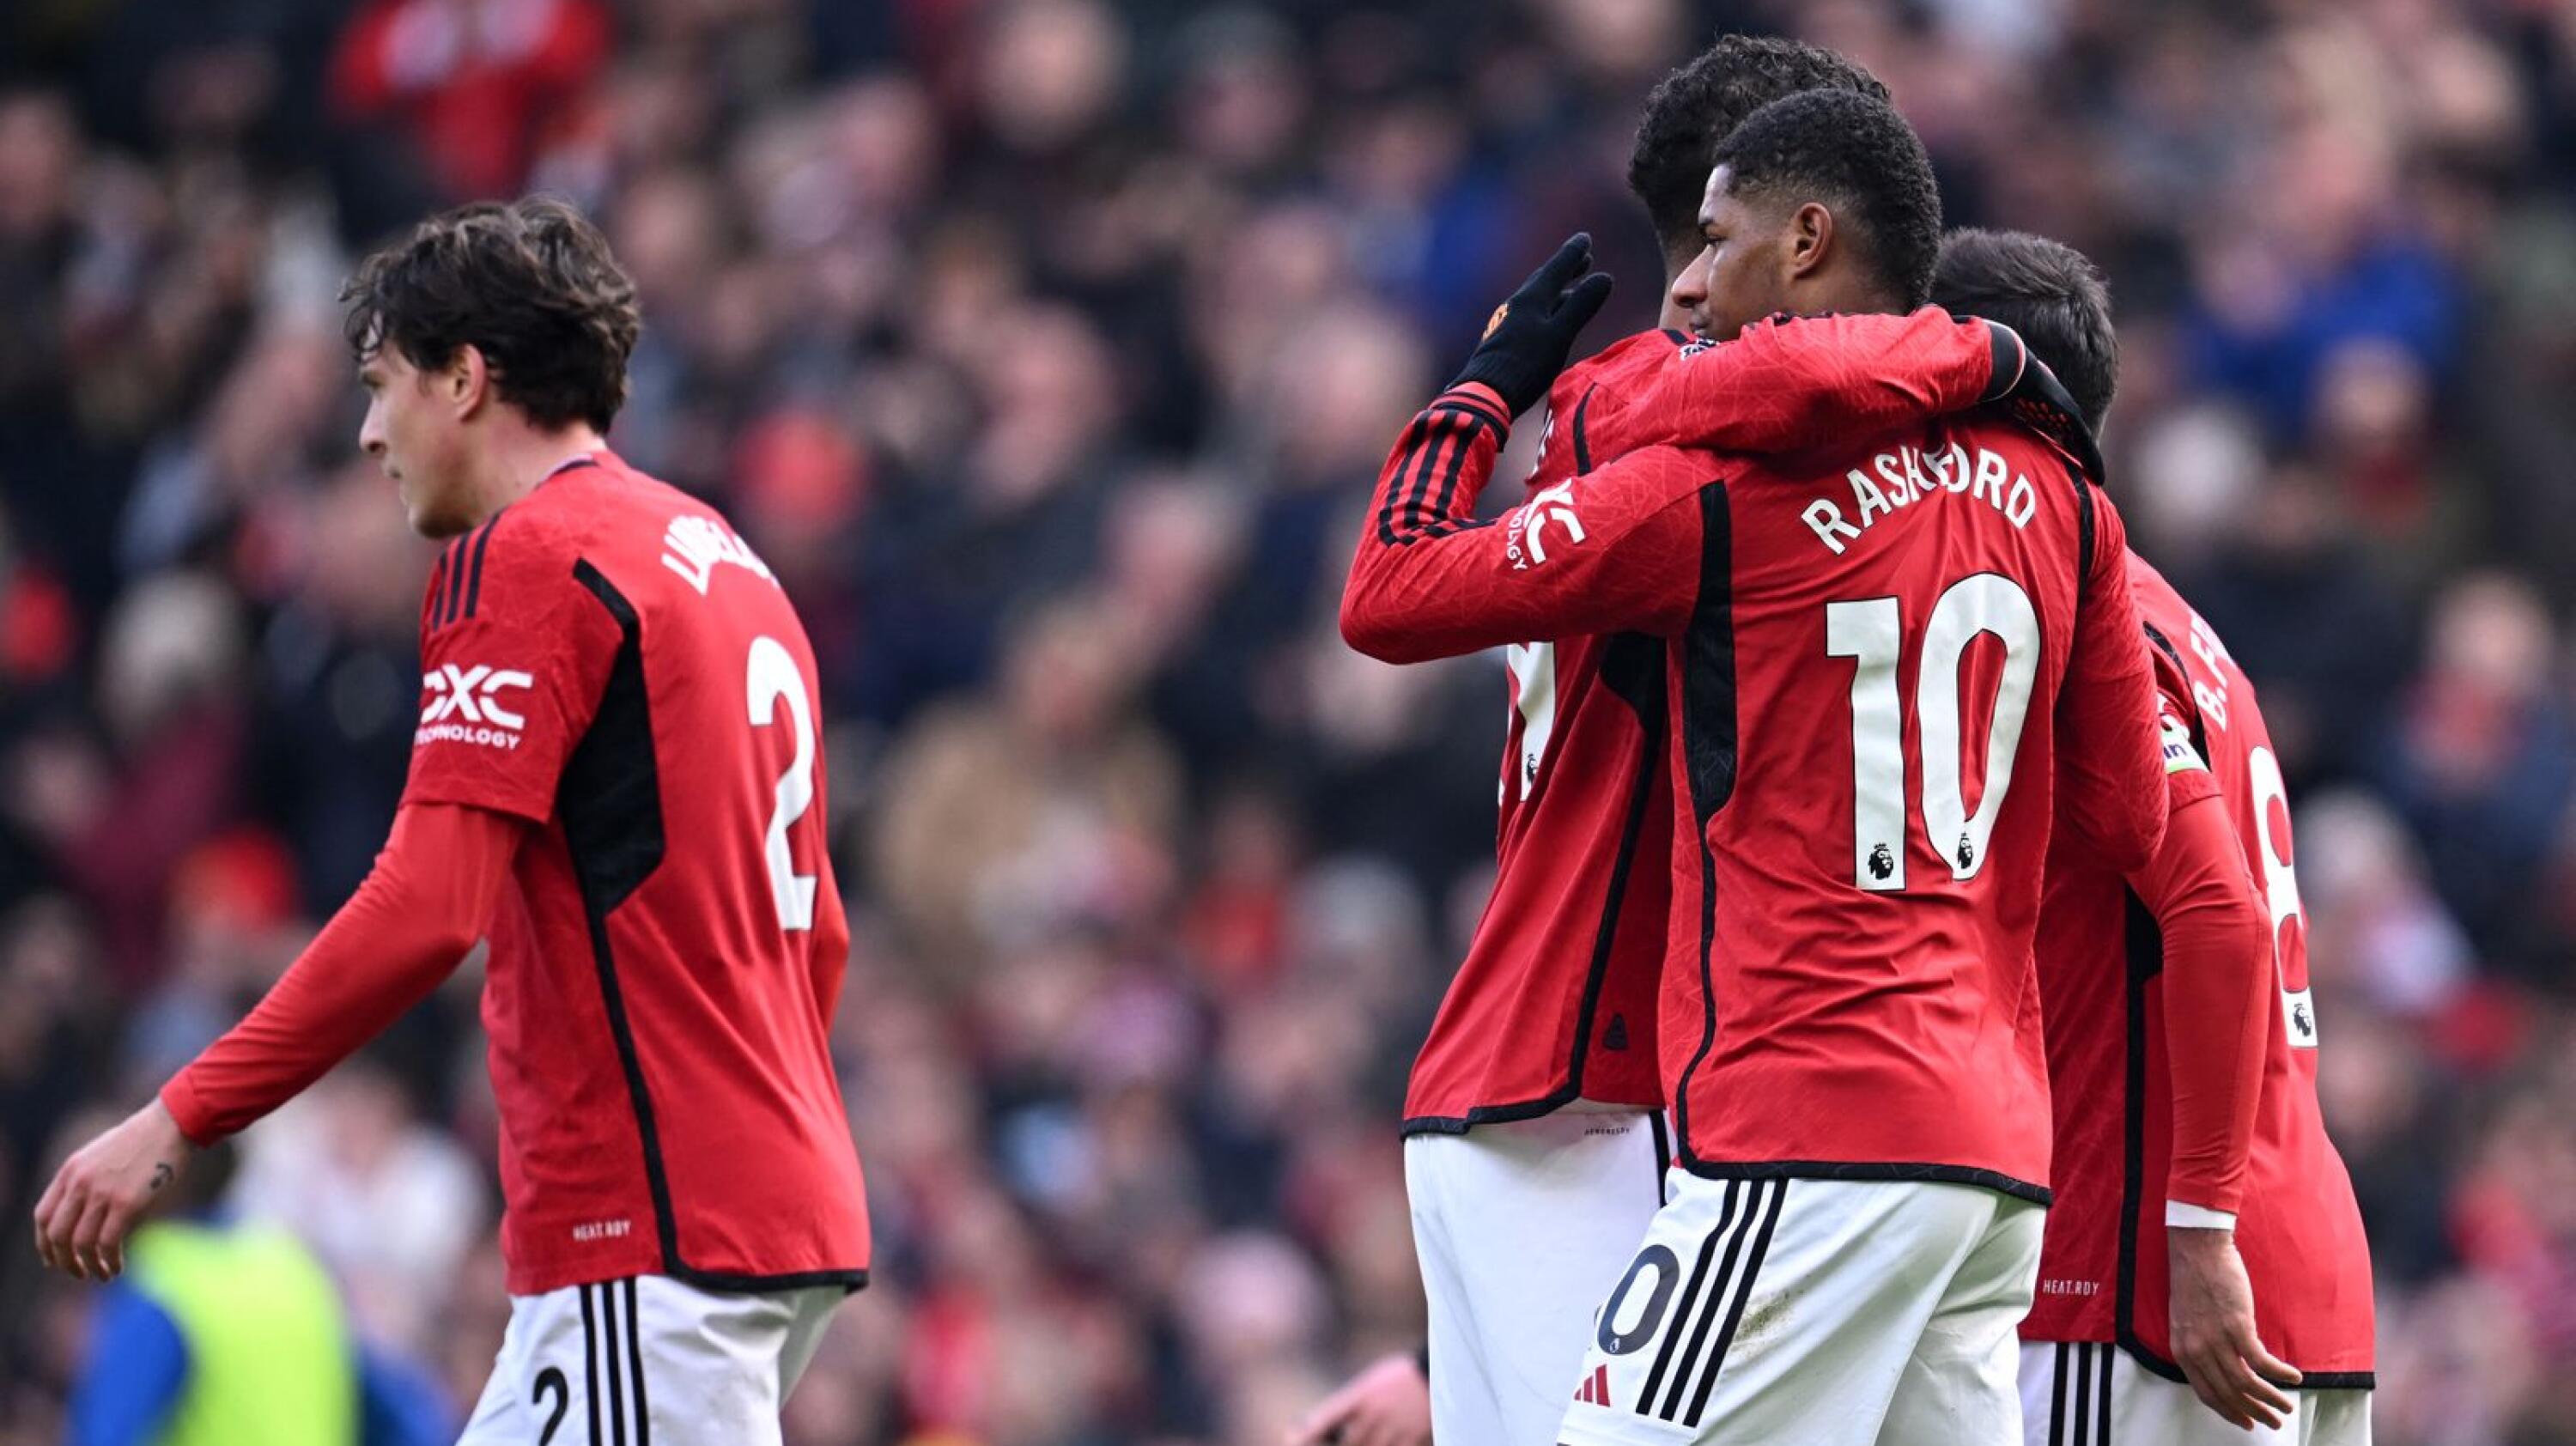 Manchester United's Marcus Rashford celebrates with teammates after scoring their second goal against Everton